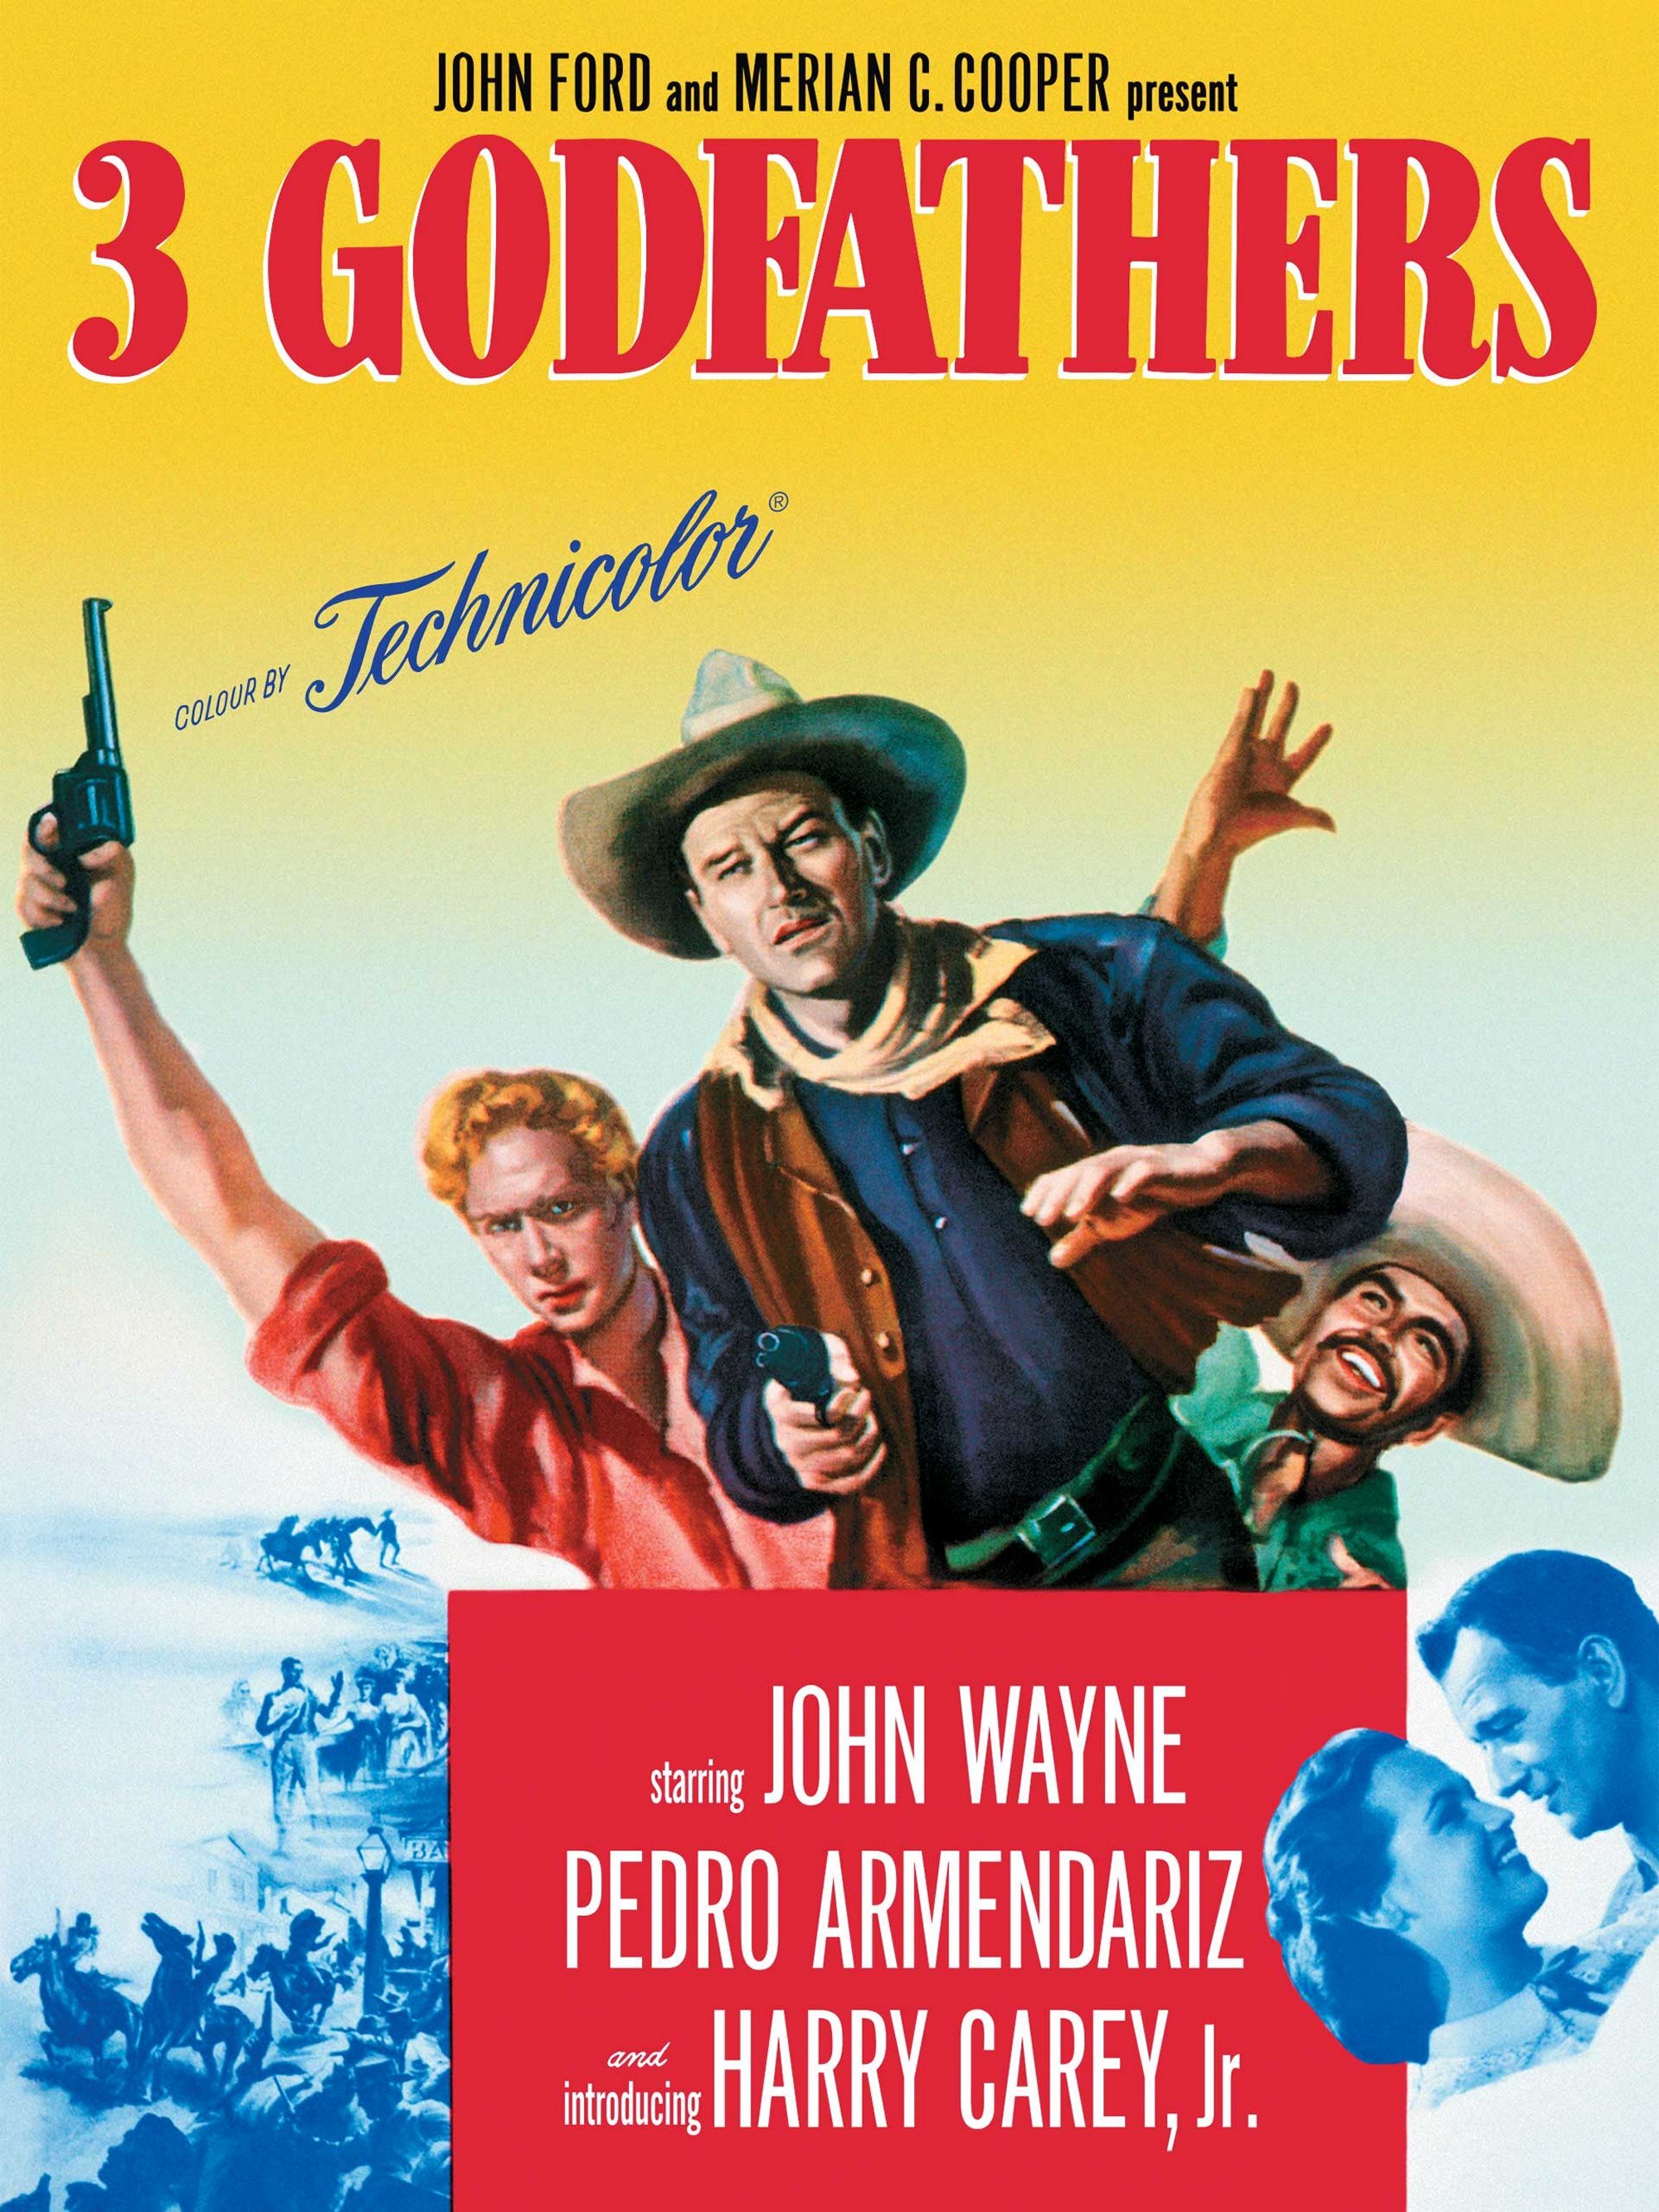 3 Godfathers - DVD [ 1948 ]  - Western Movies On DVD - Movies On GRUV